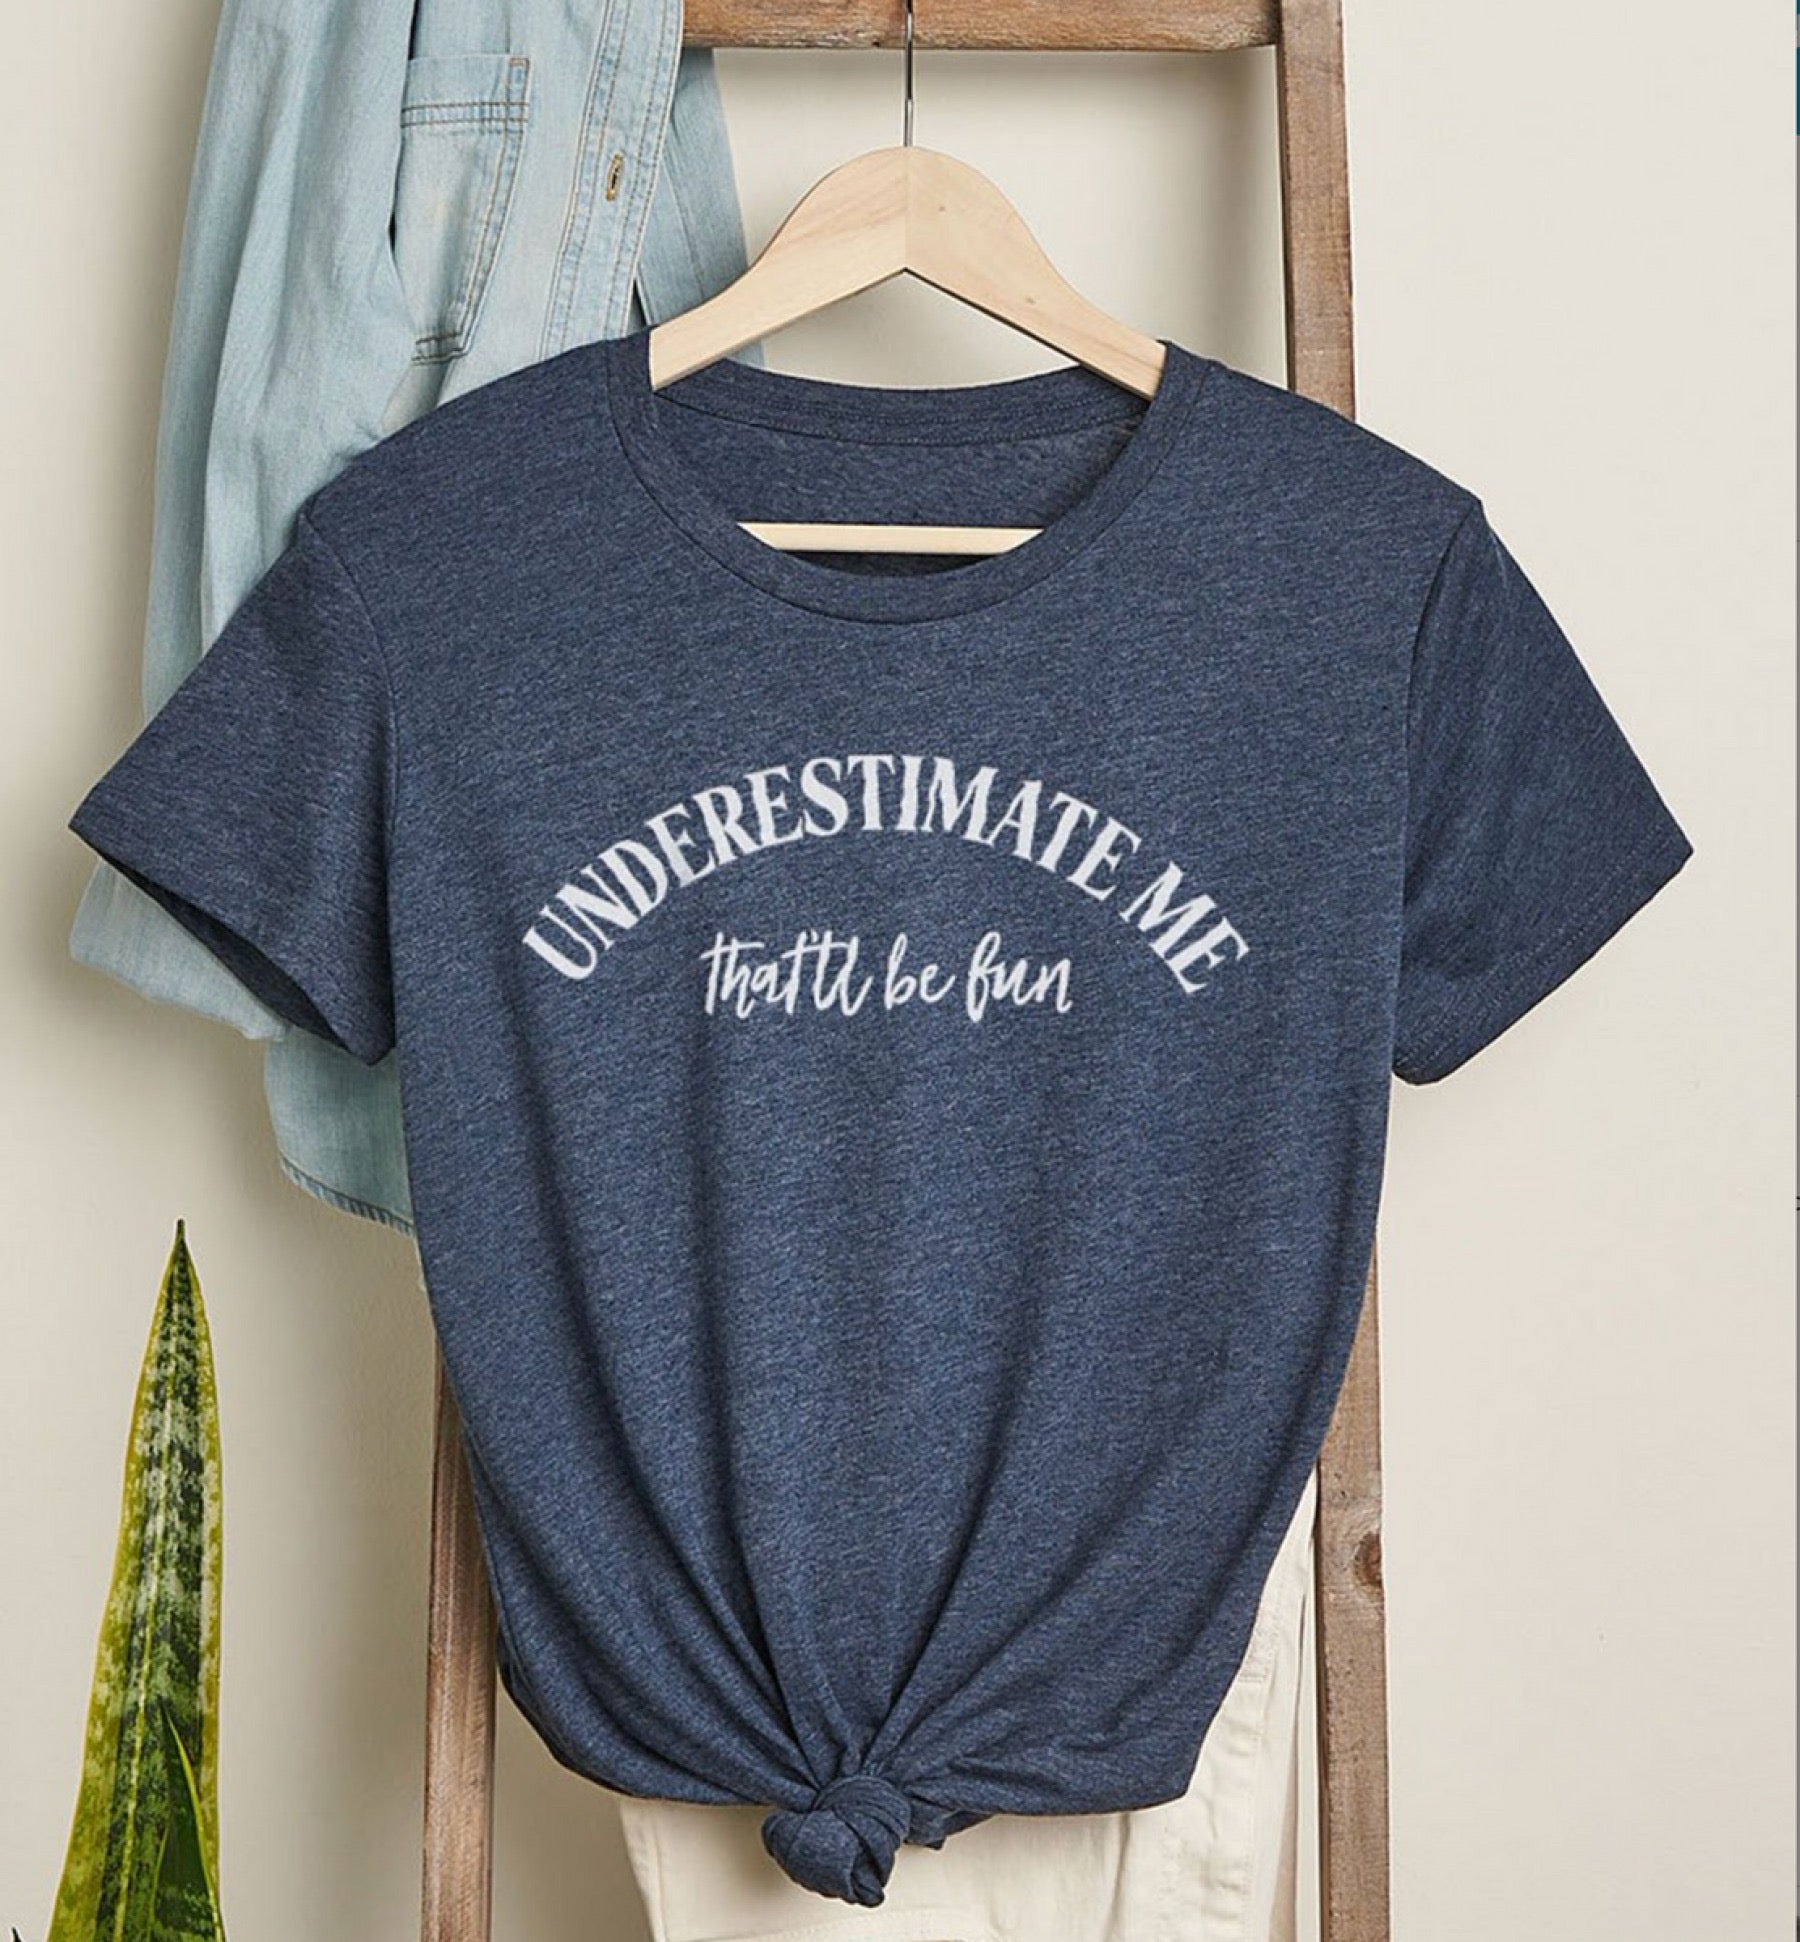 Underestimate me, that will be fun tshirt